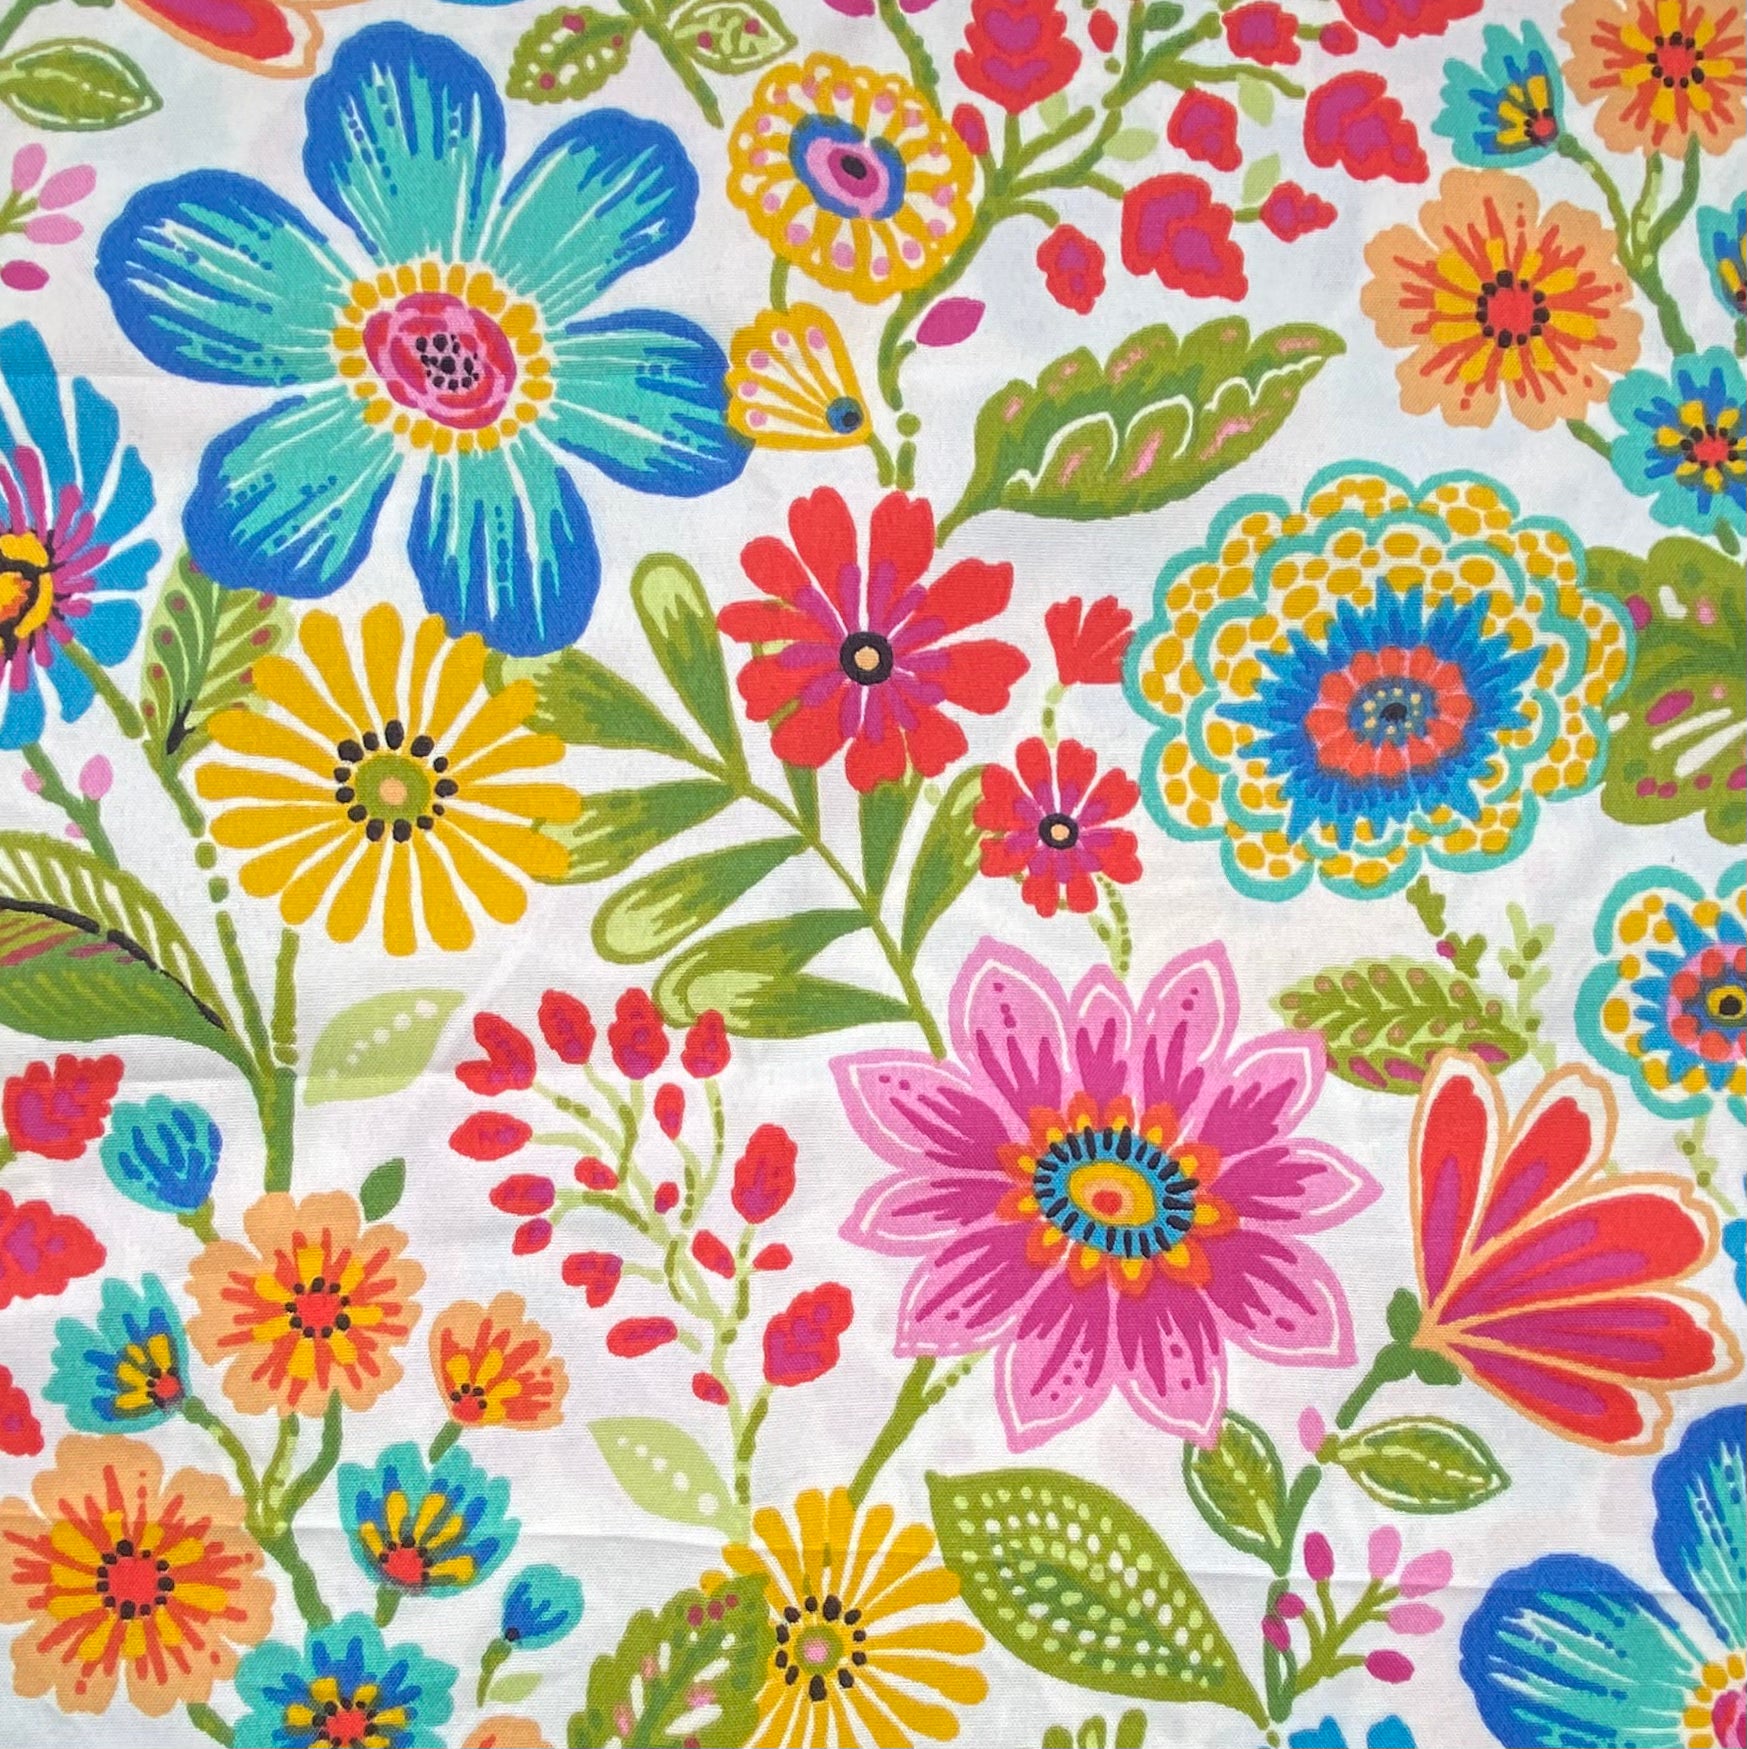 Floral Printed Indoor/Outdoor Upholstery - Multi-Coloured